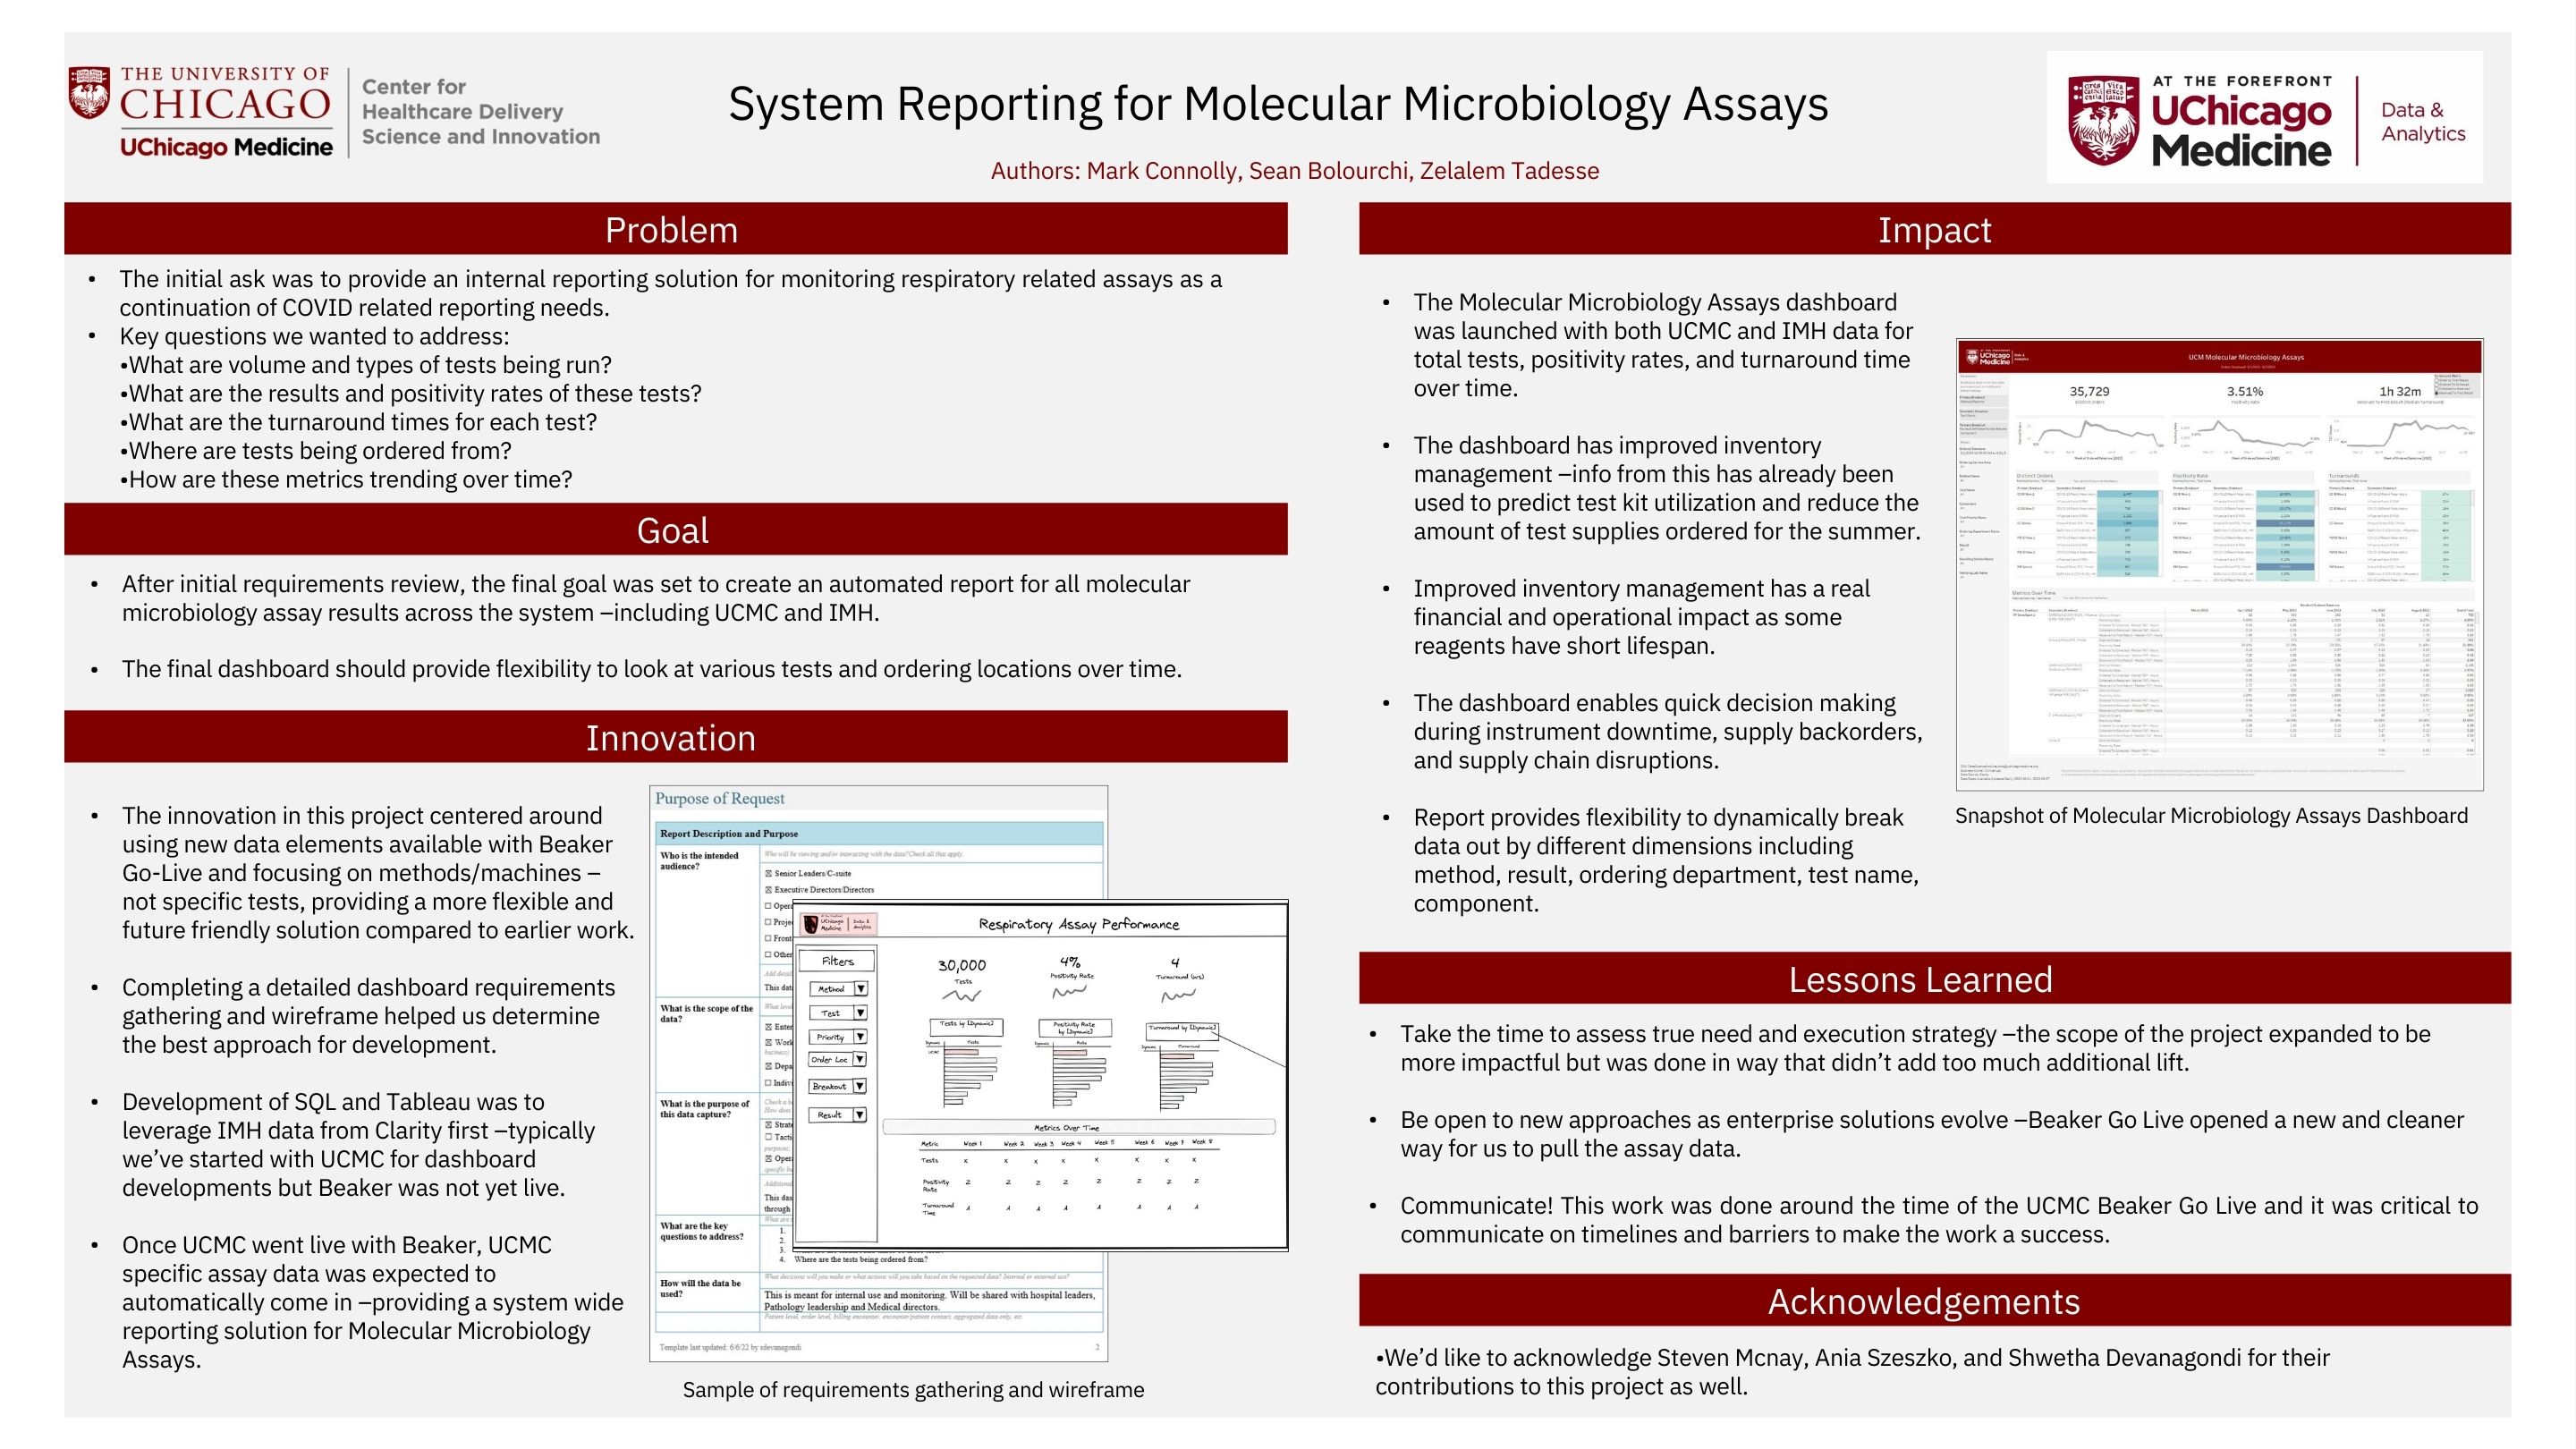 CONNOLLY_System Reporting for Molecular Microbiology Assays